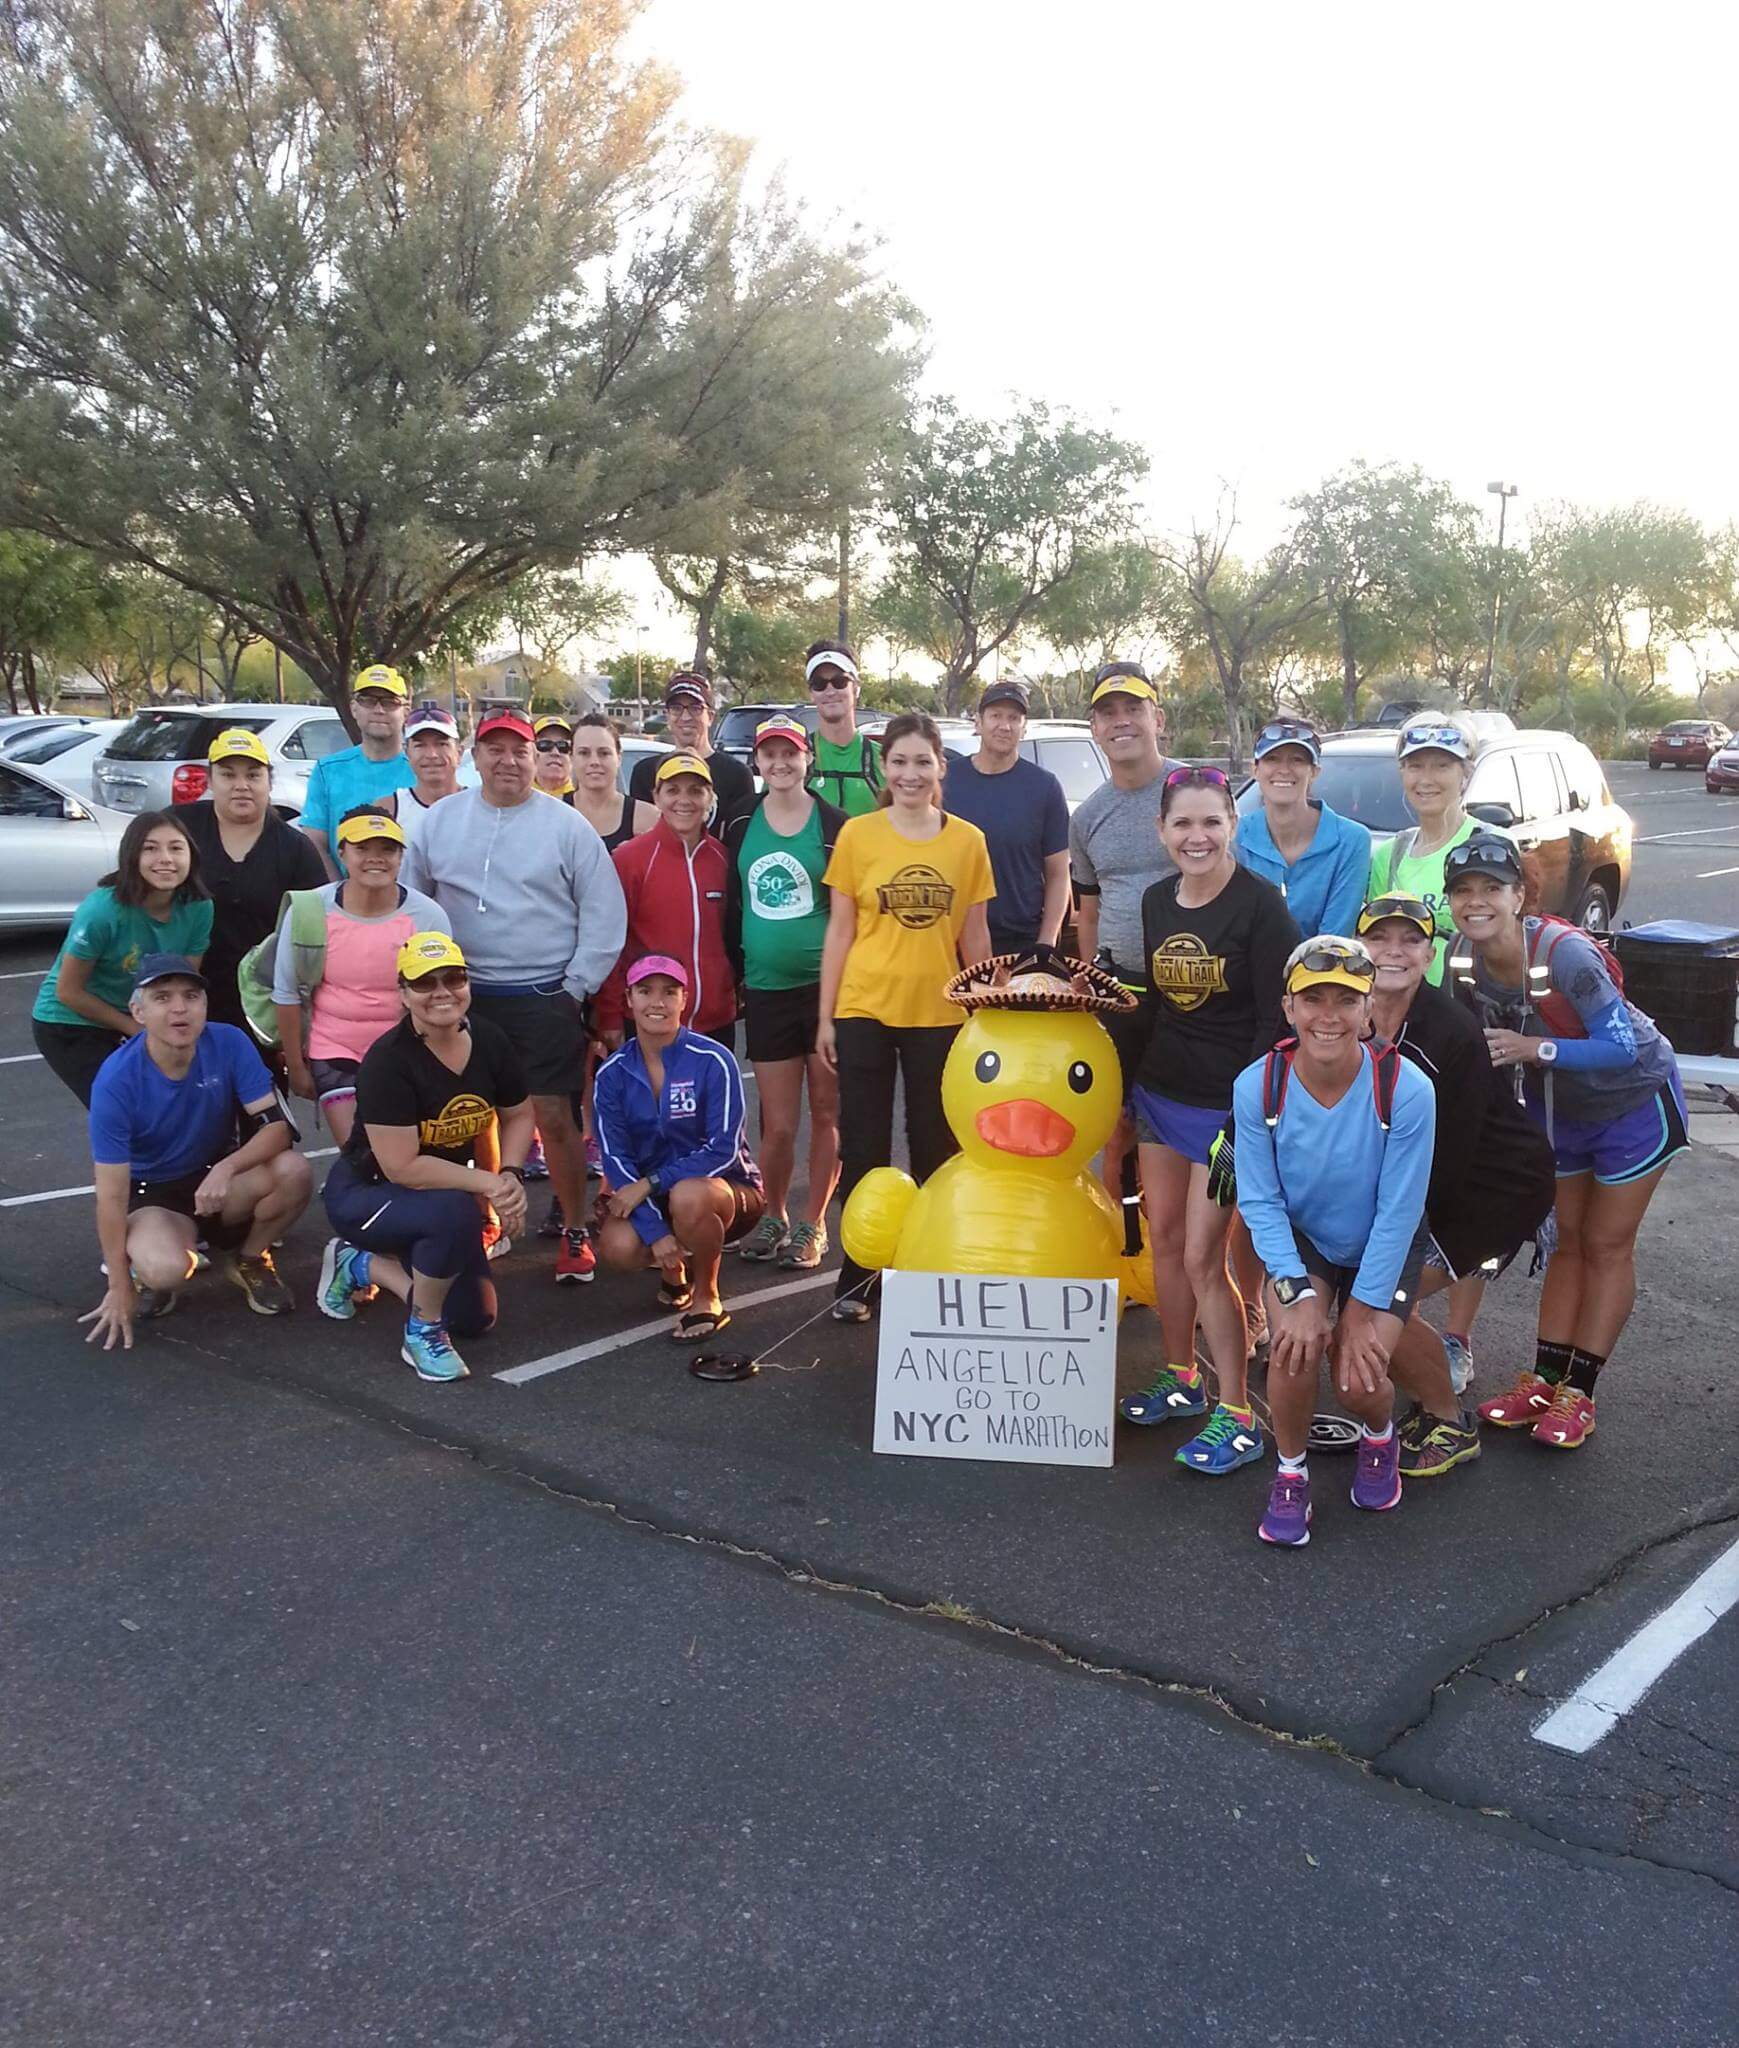 So lucky to have an amazing running family <3 (the duck is an inside club joke, lol!)